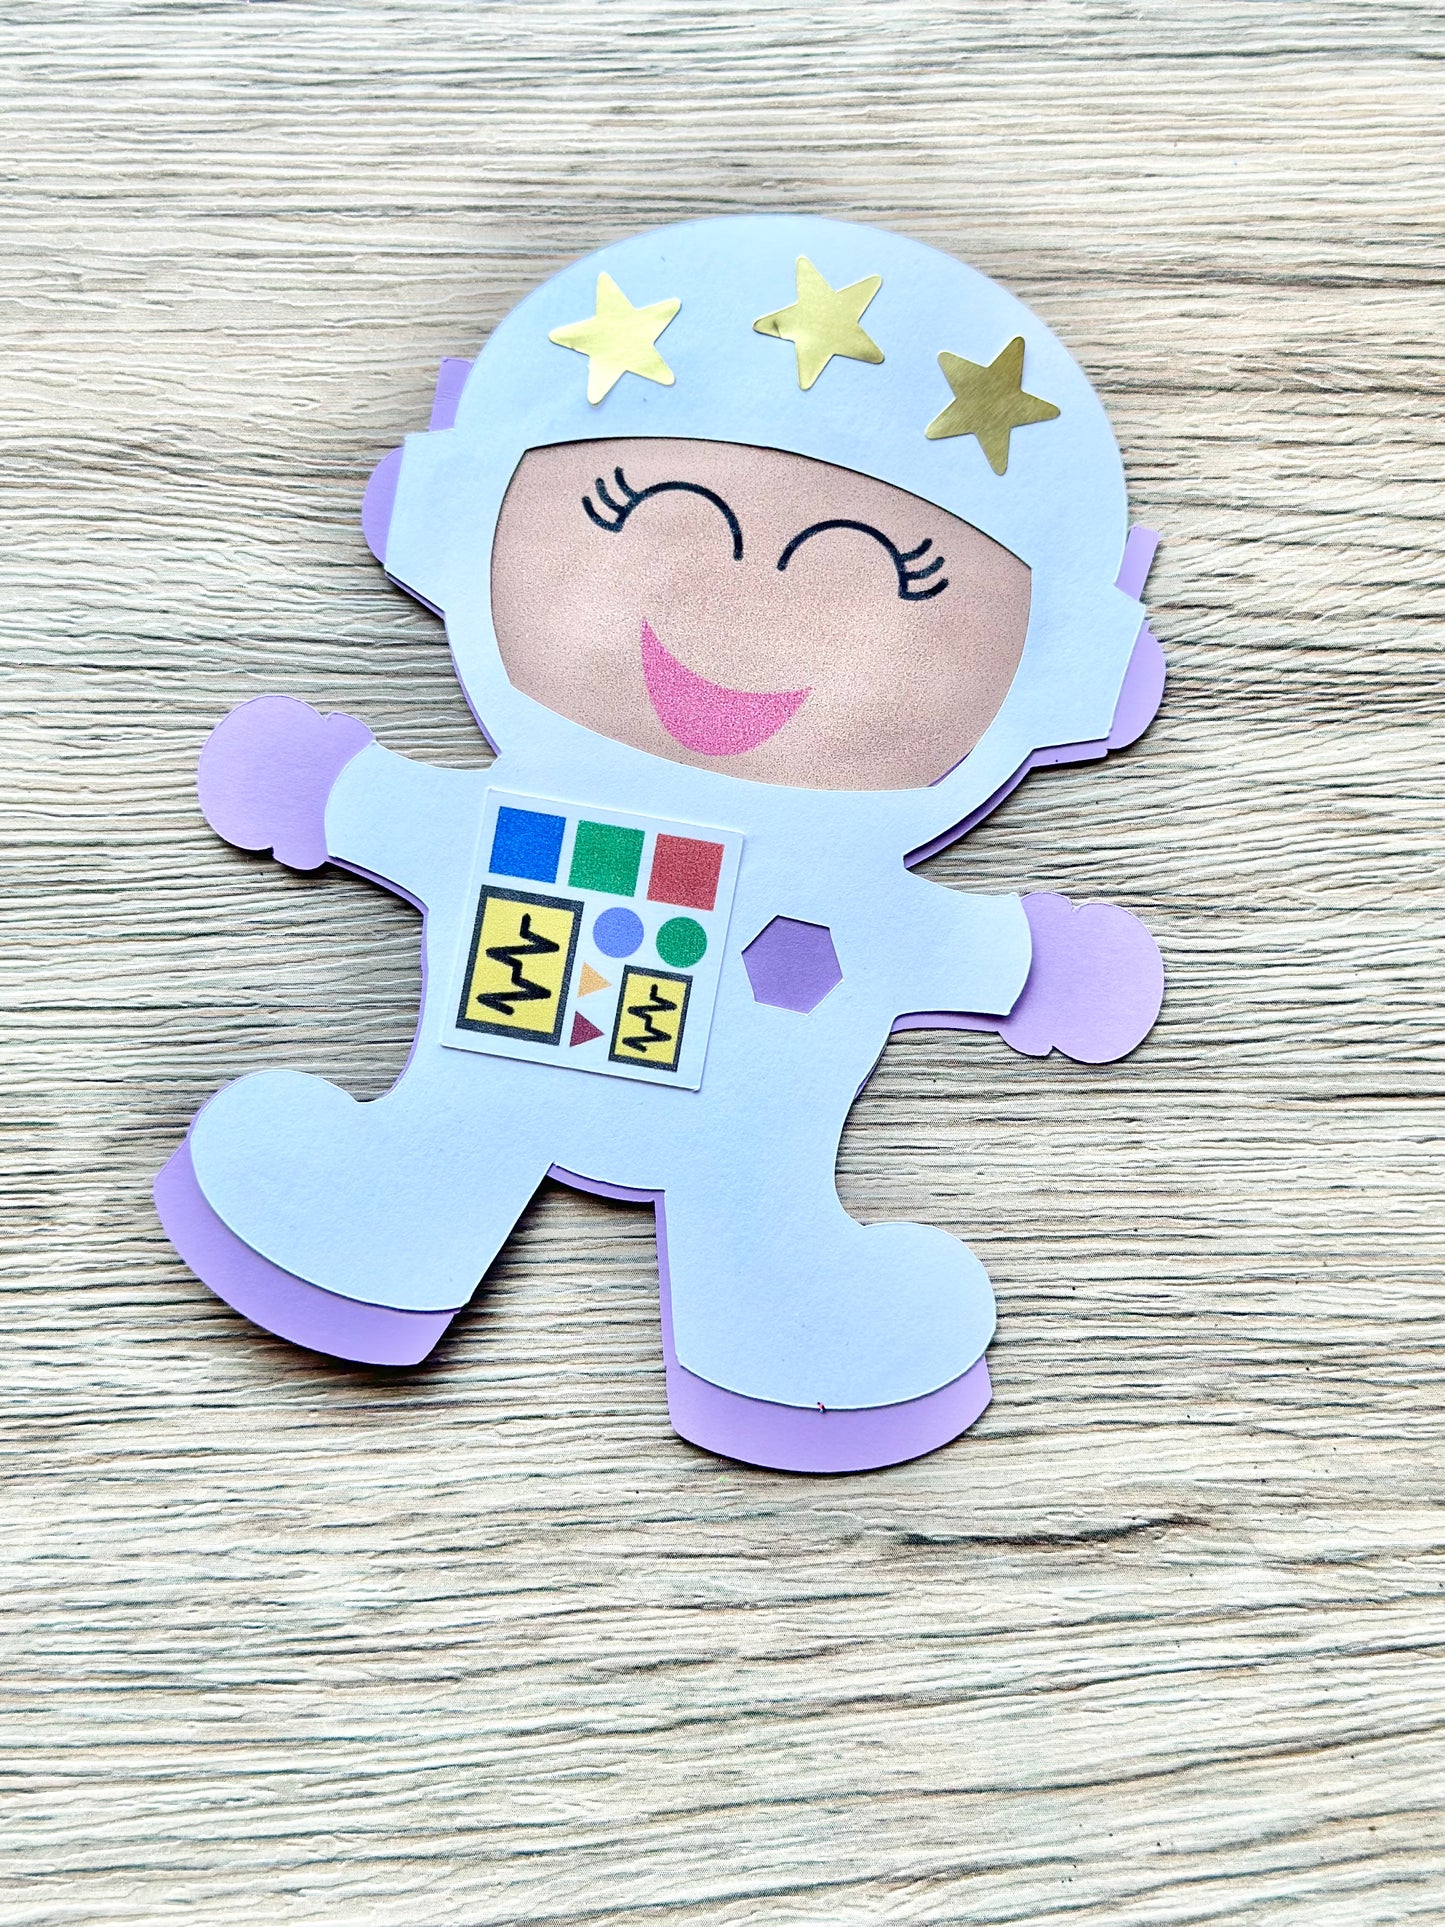 Make Your Own Astronaut Paper Doll Paper Craft Kit